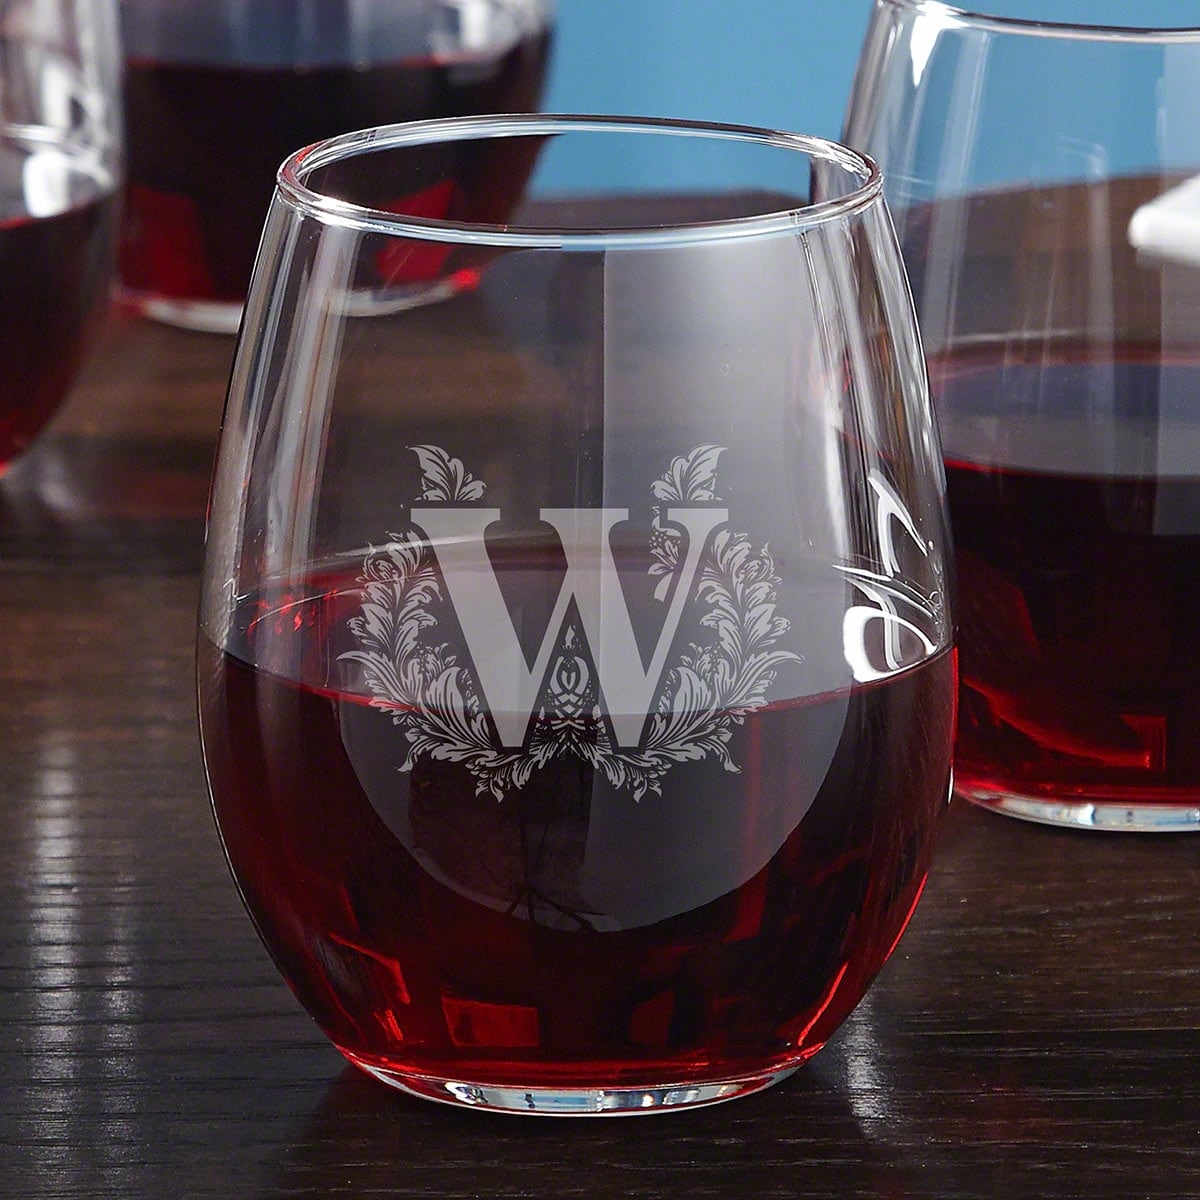 https://ak1.ostkcdn.com/images/products/is/images/direct/37622cb83134c474247a0530a2015914ac679aa7/Highbury-Stemless-Personalized-Wine-Glass.jpg